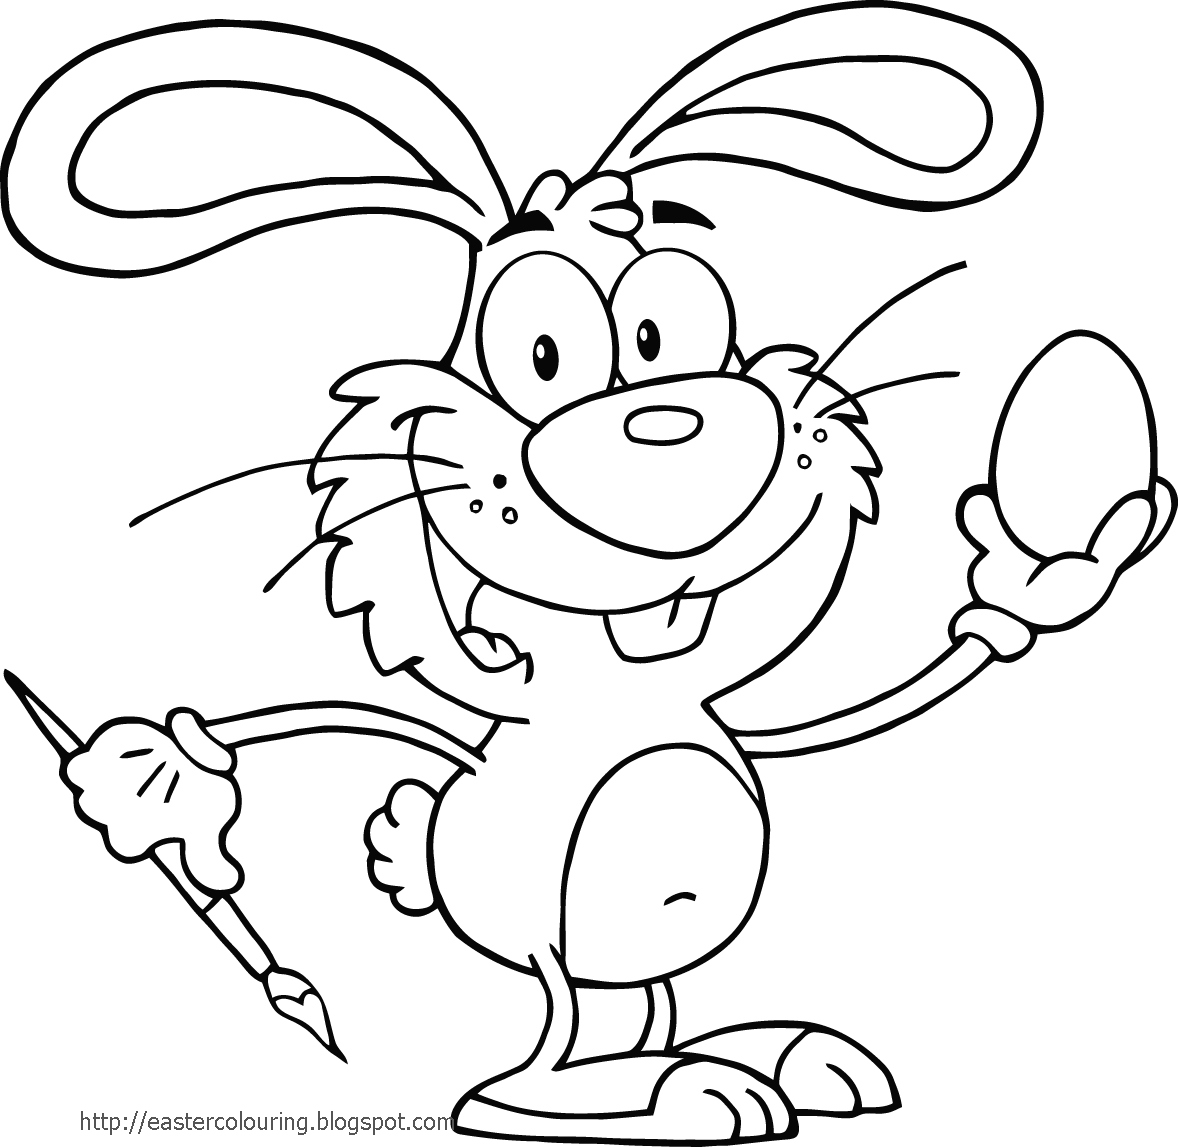 EASTER BUNNY COLOURING IN PAGES